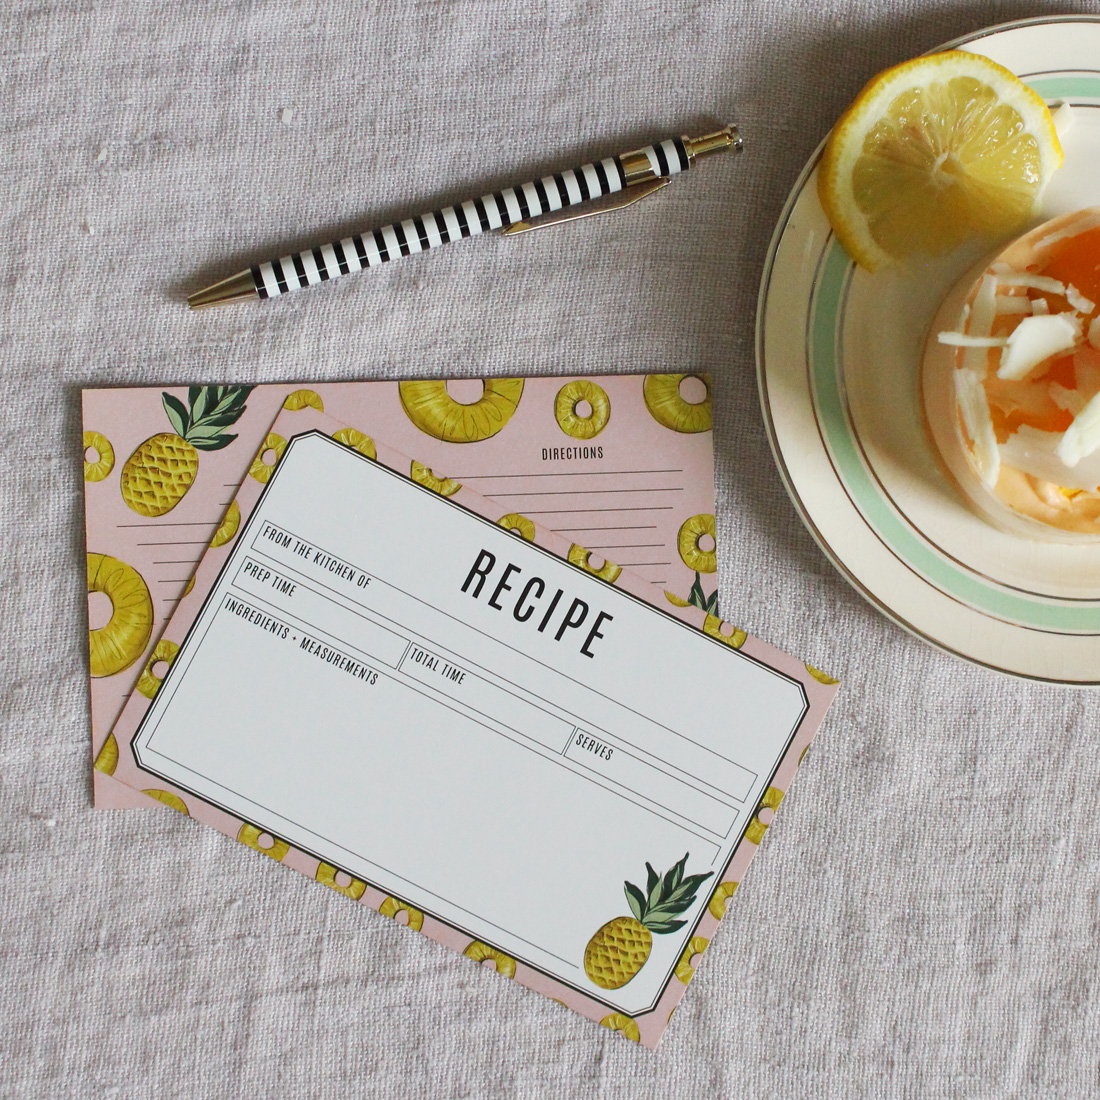 Make your recipes look cute with these adorable recipe cards